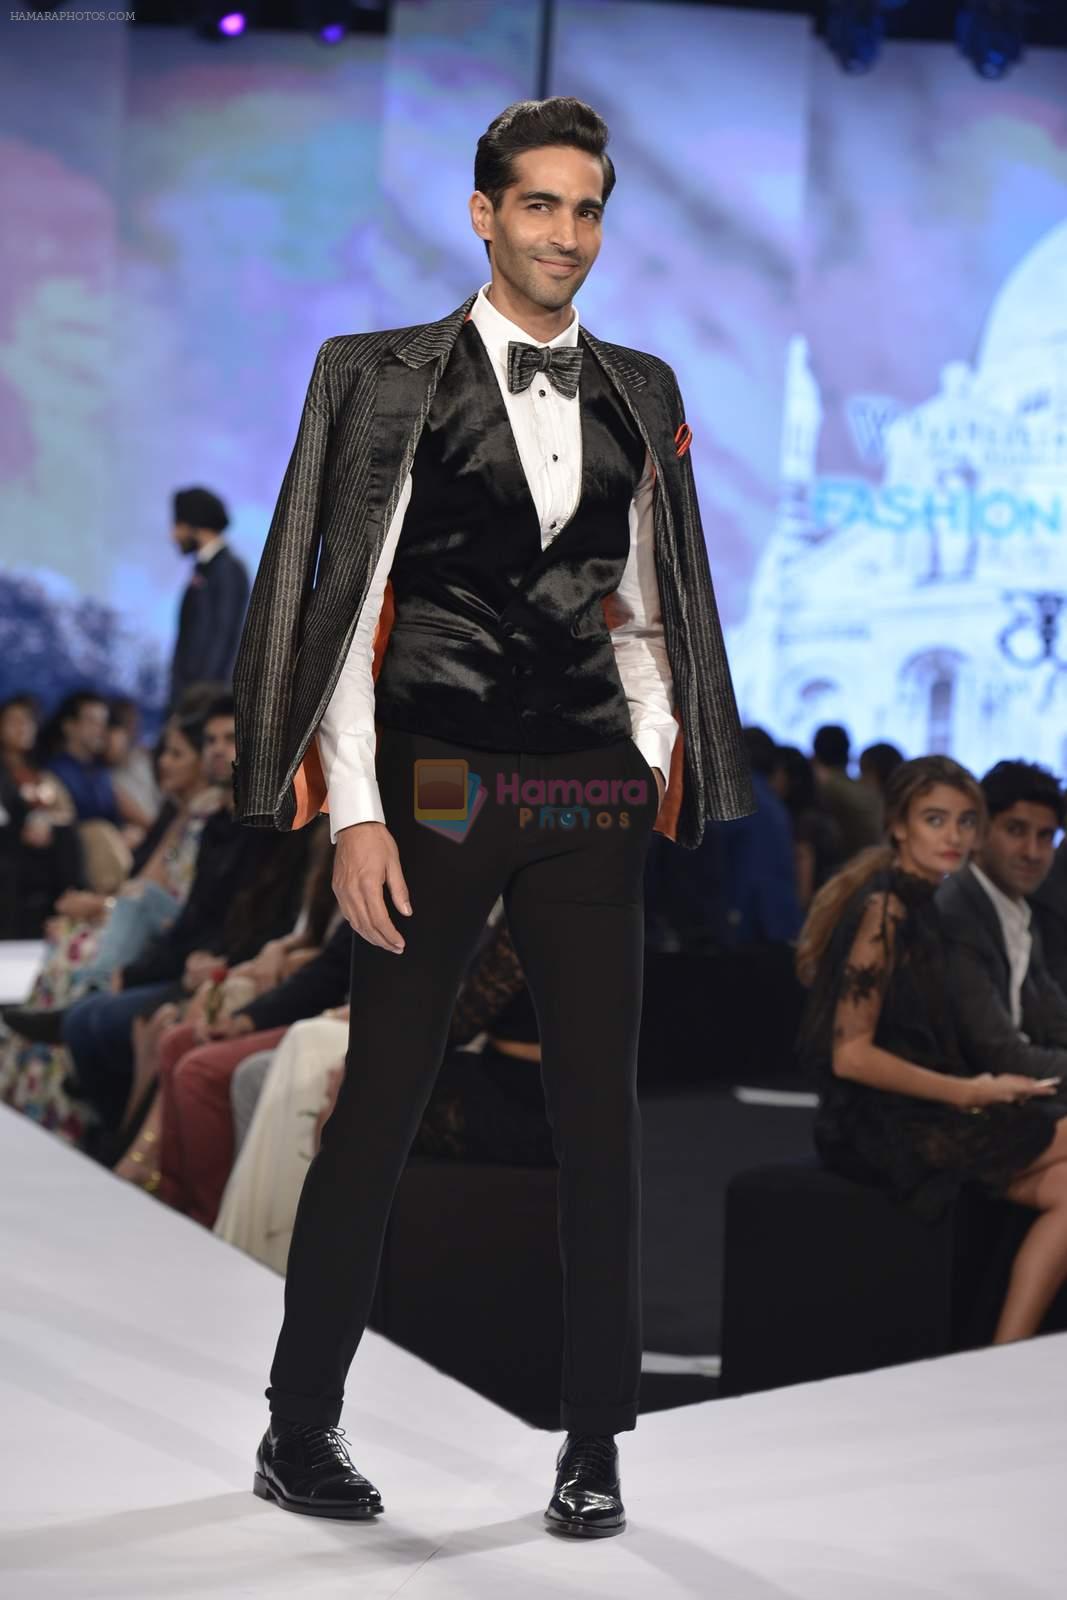 Model walk for troy costa Show on 1st Dec 2015